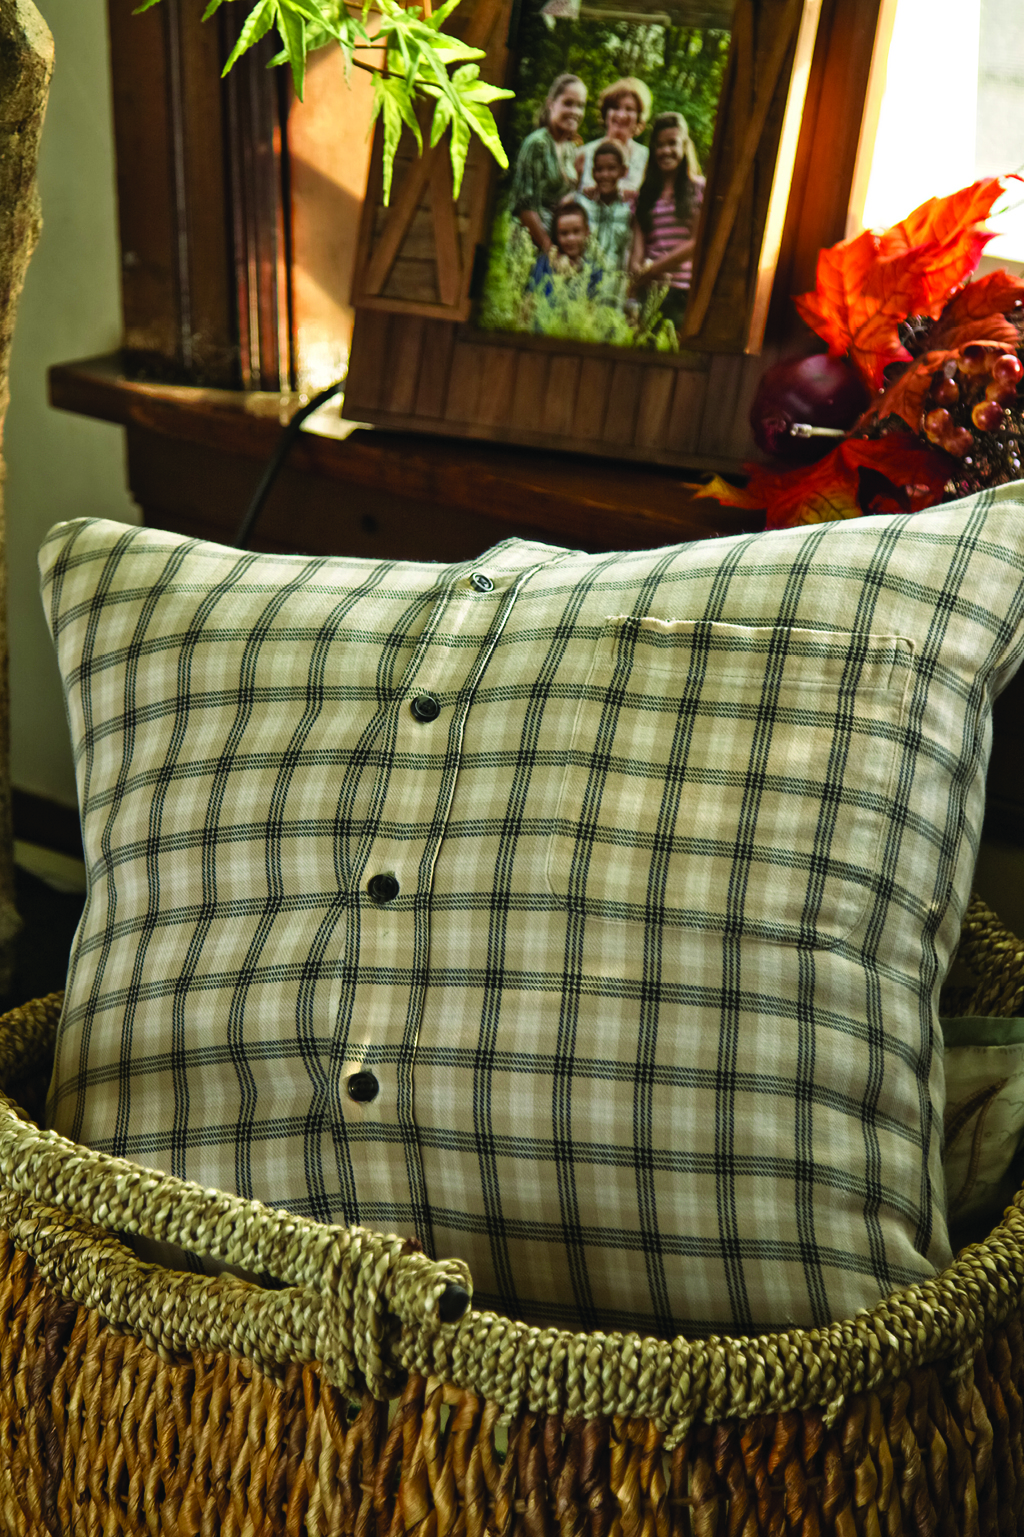 Blue and white checkered pillow